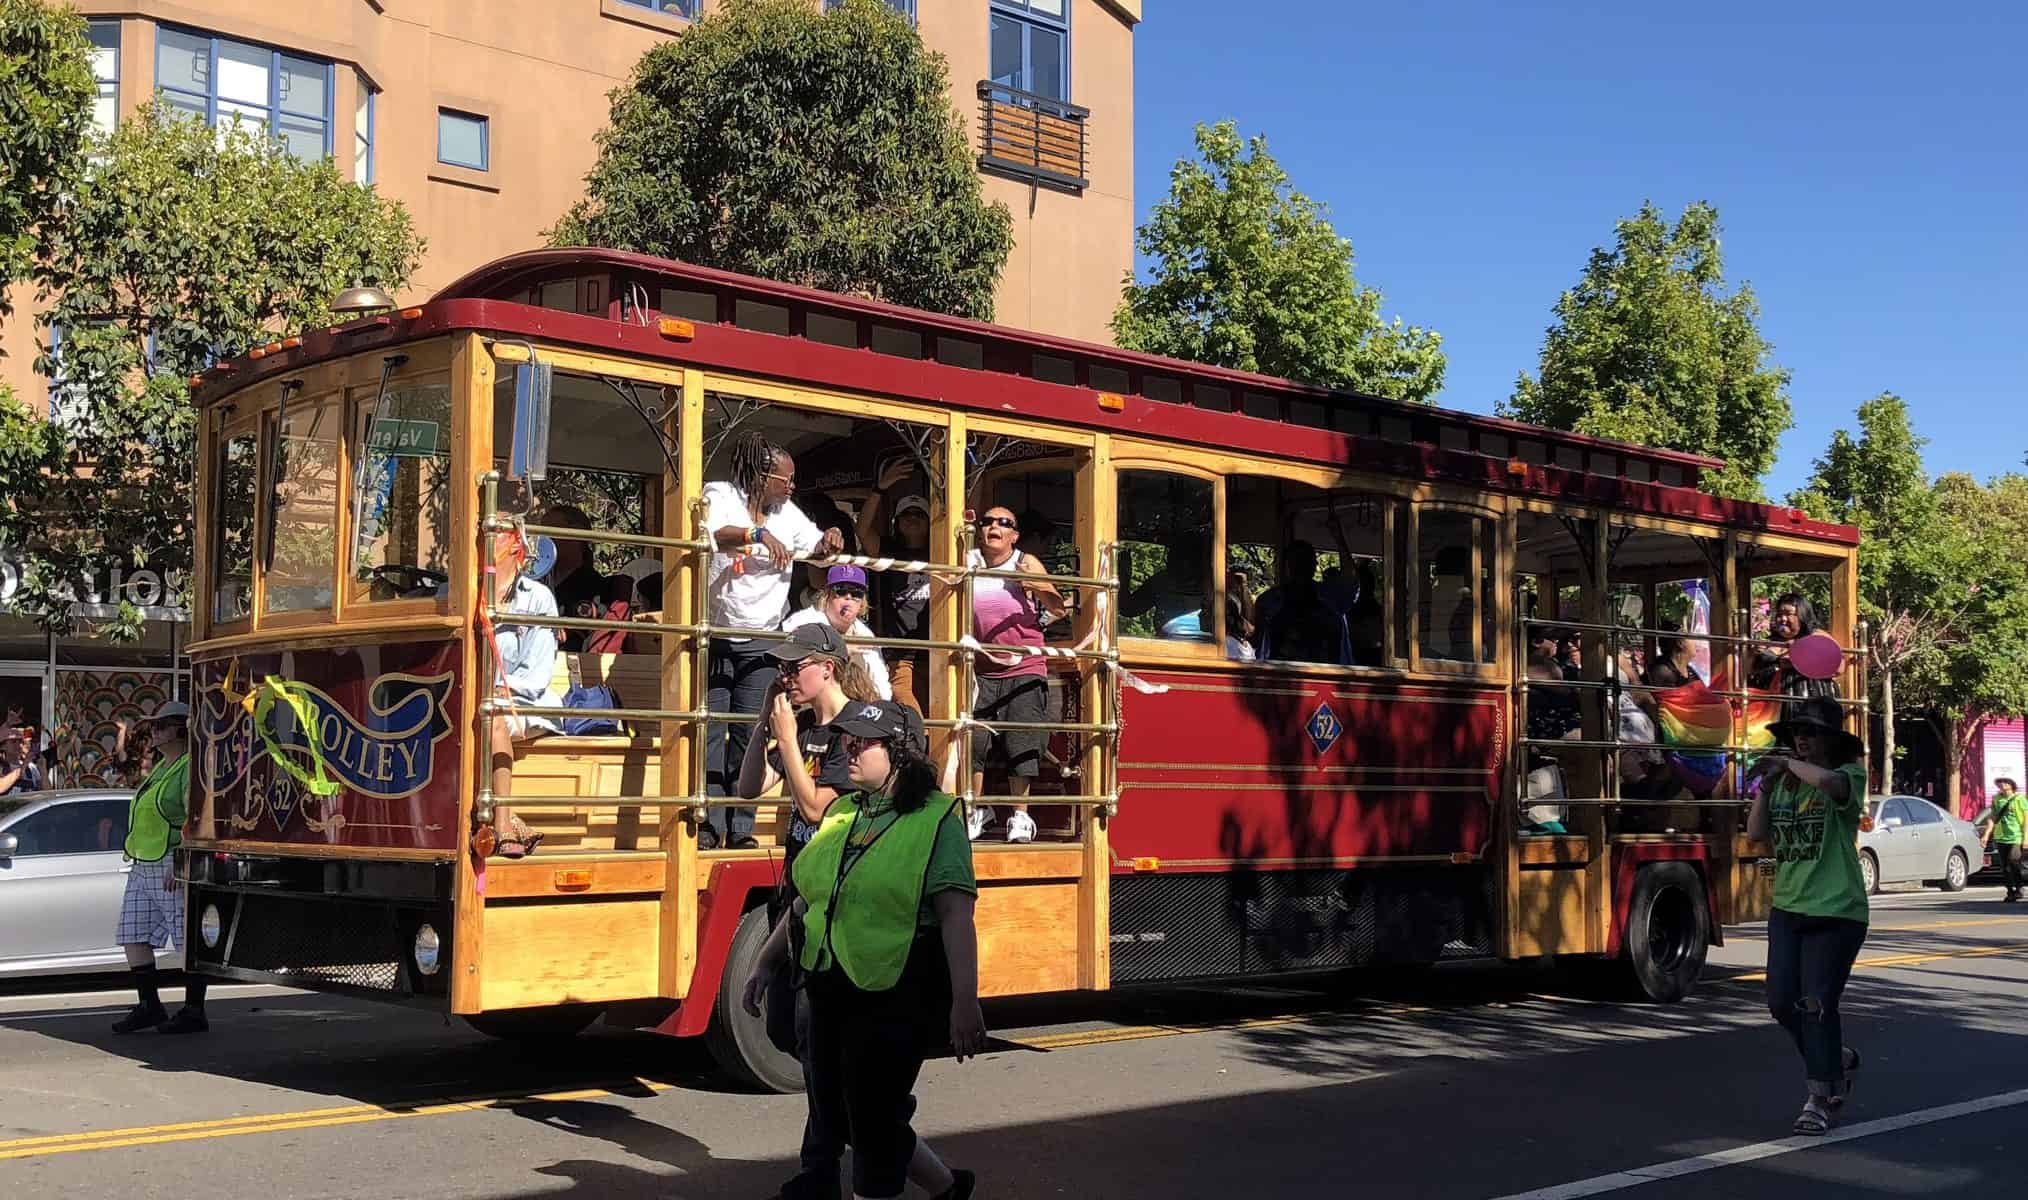 A trolley with people on it in rolling through a march.